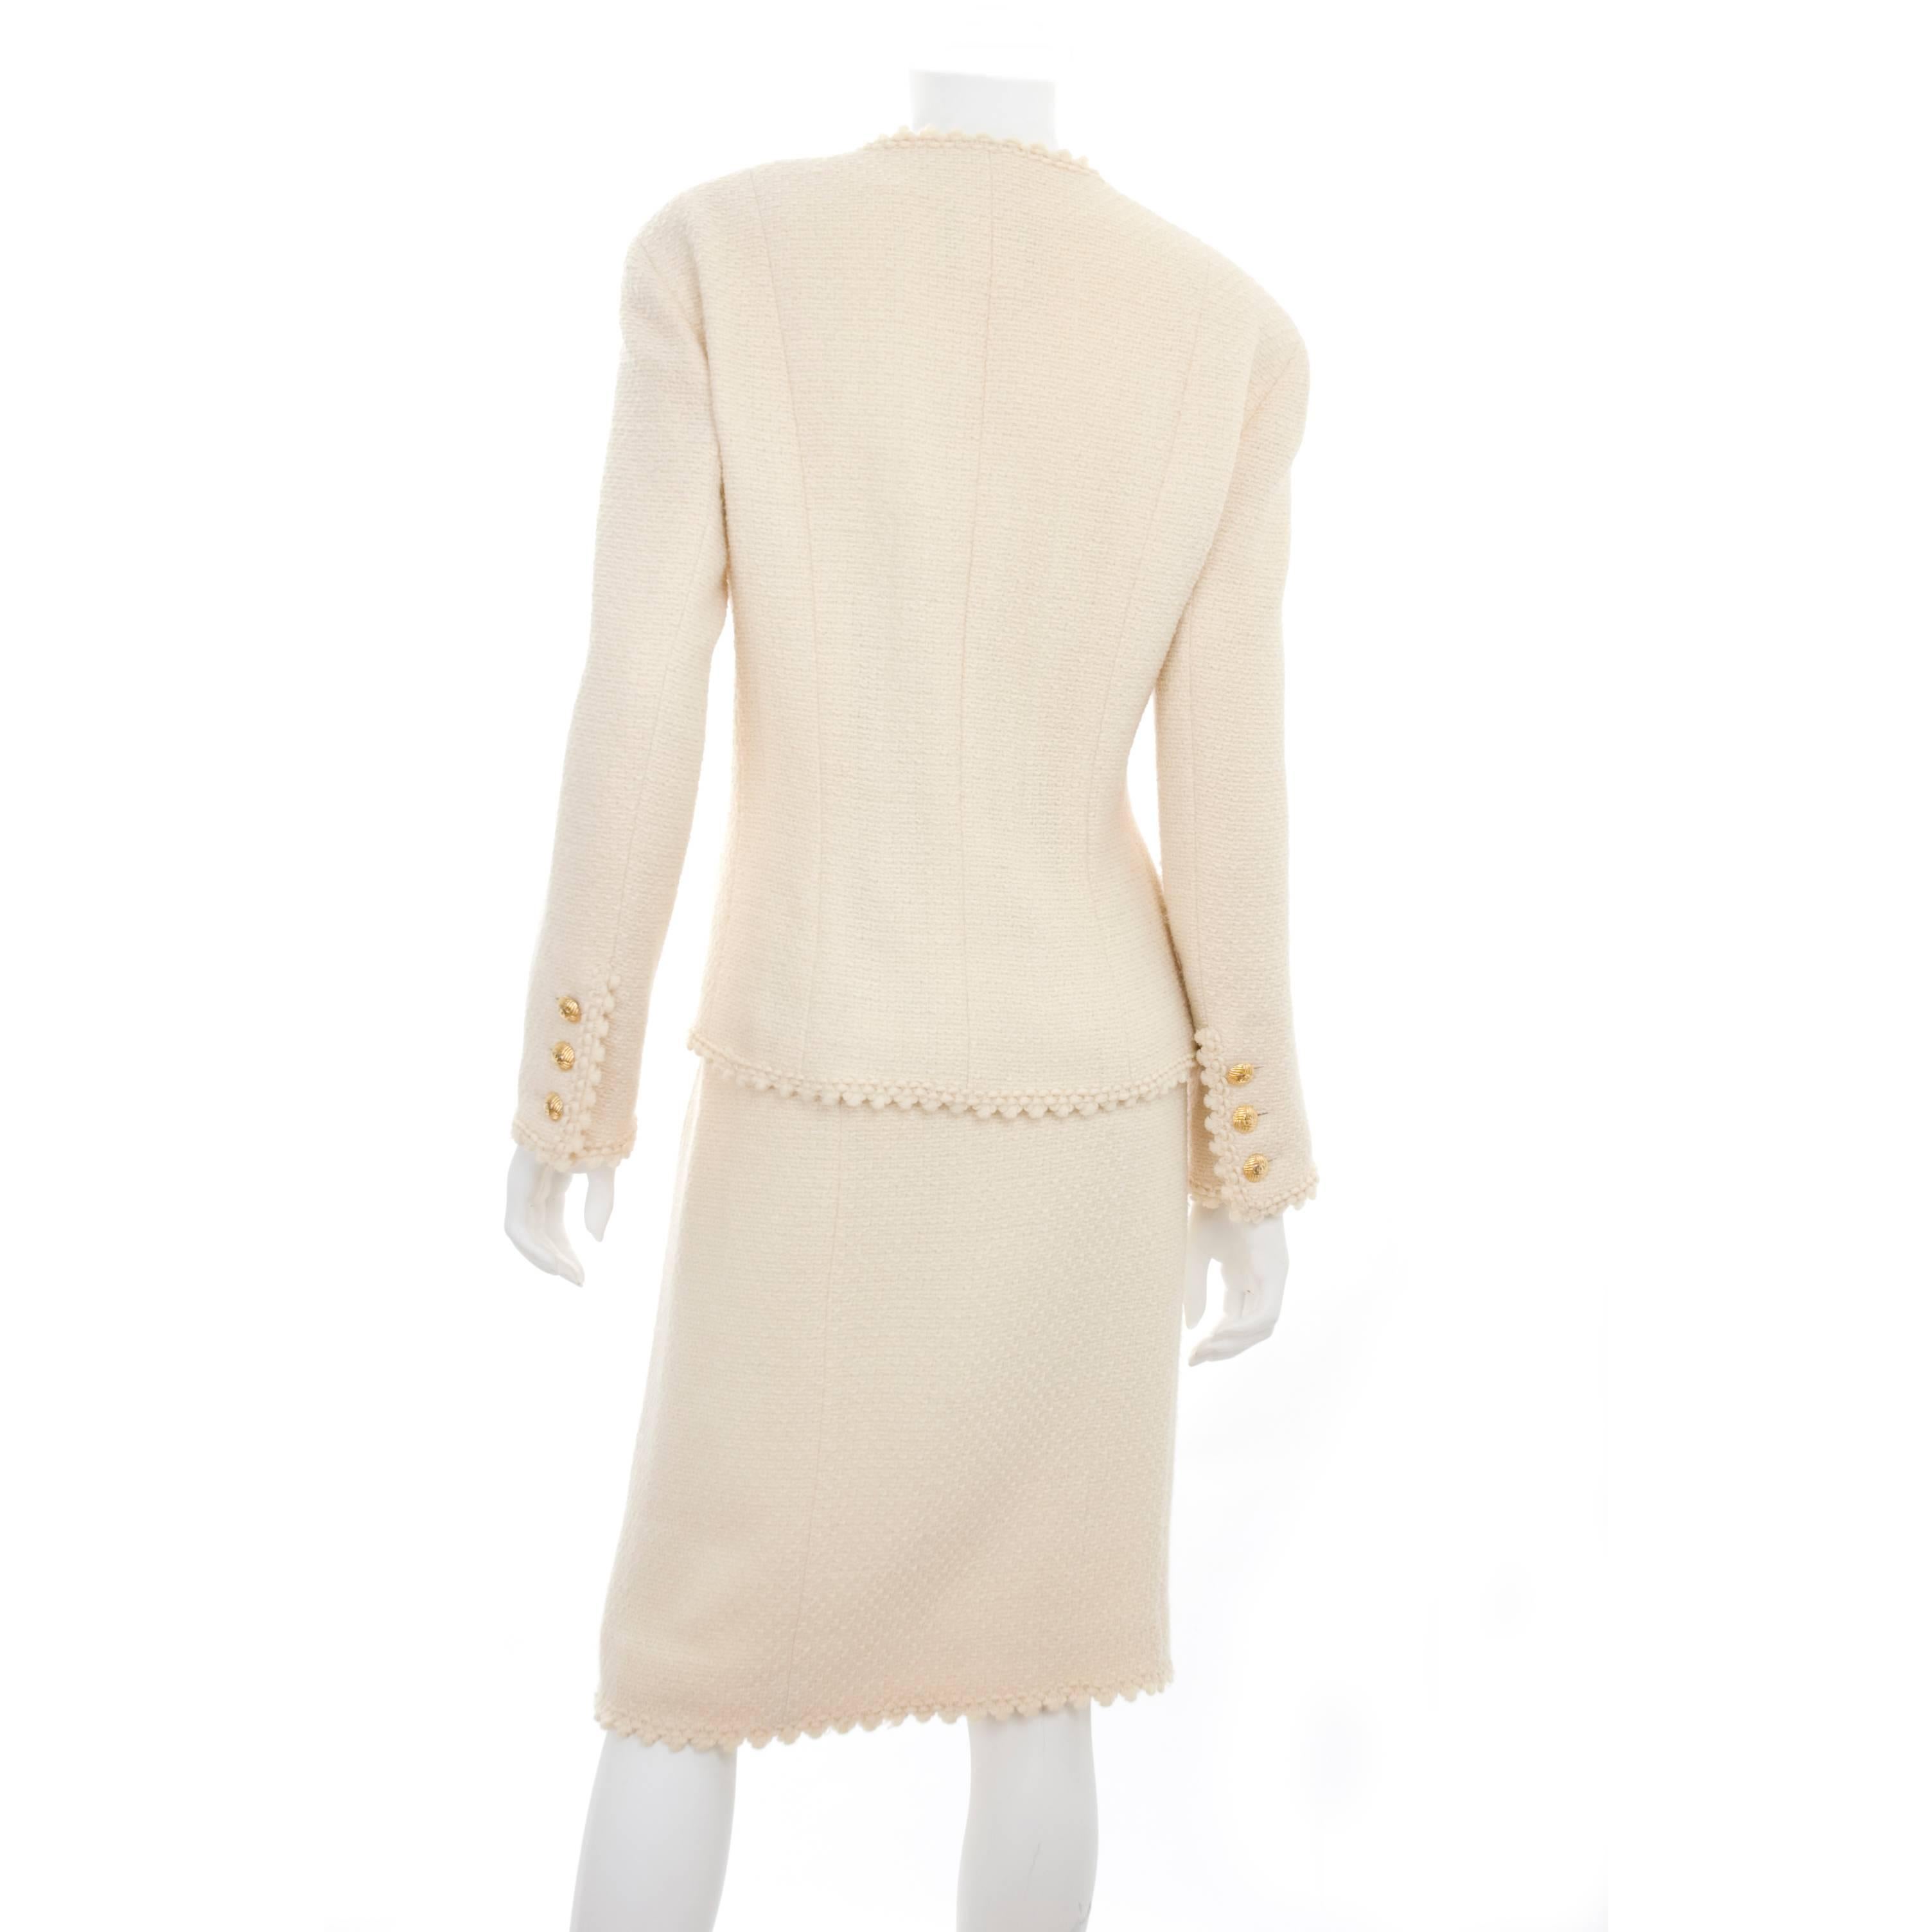 80's Vintage Chanel Suit in Creme with Picot Edge and Gold Buttons 1